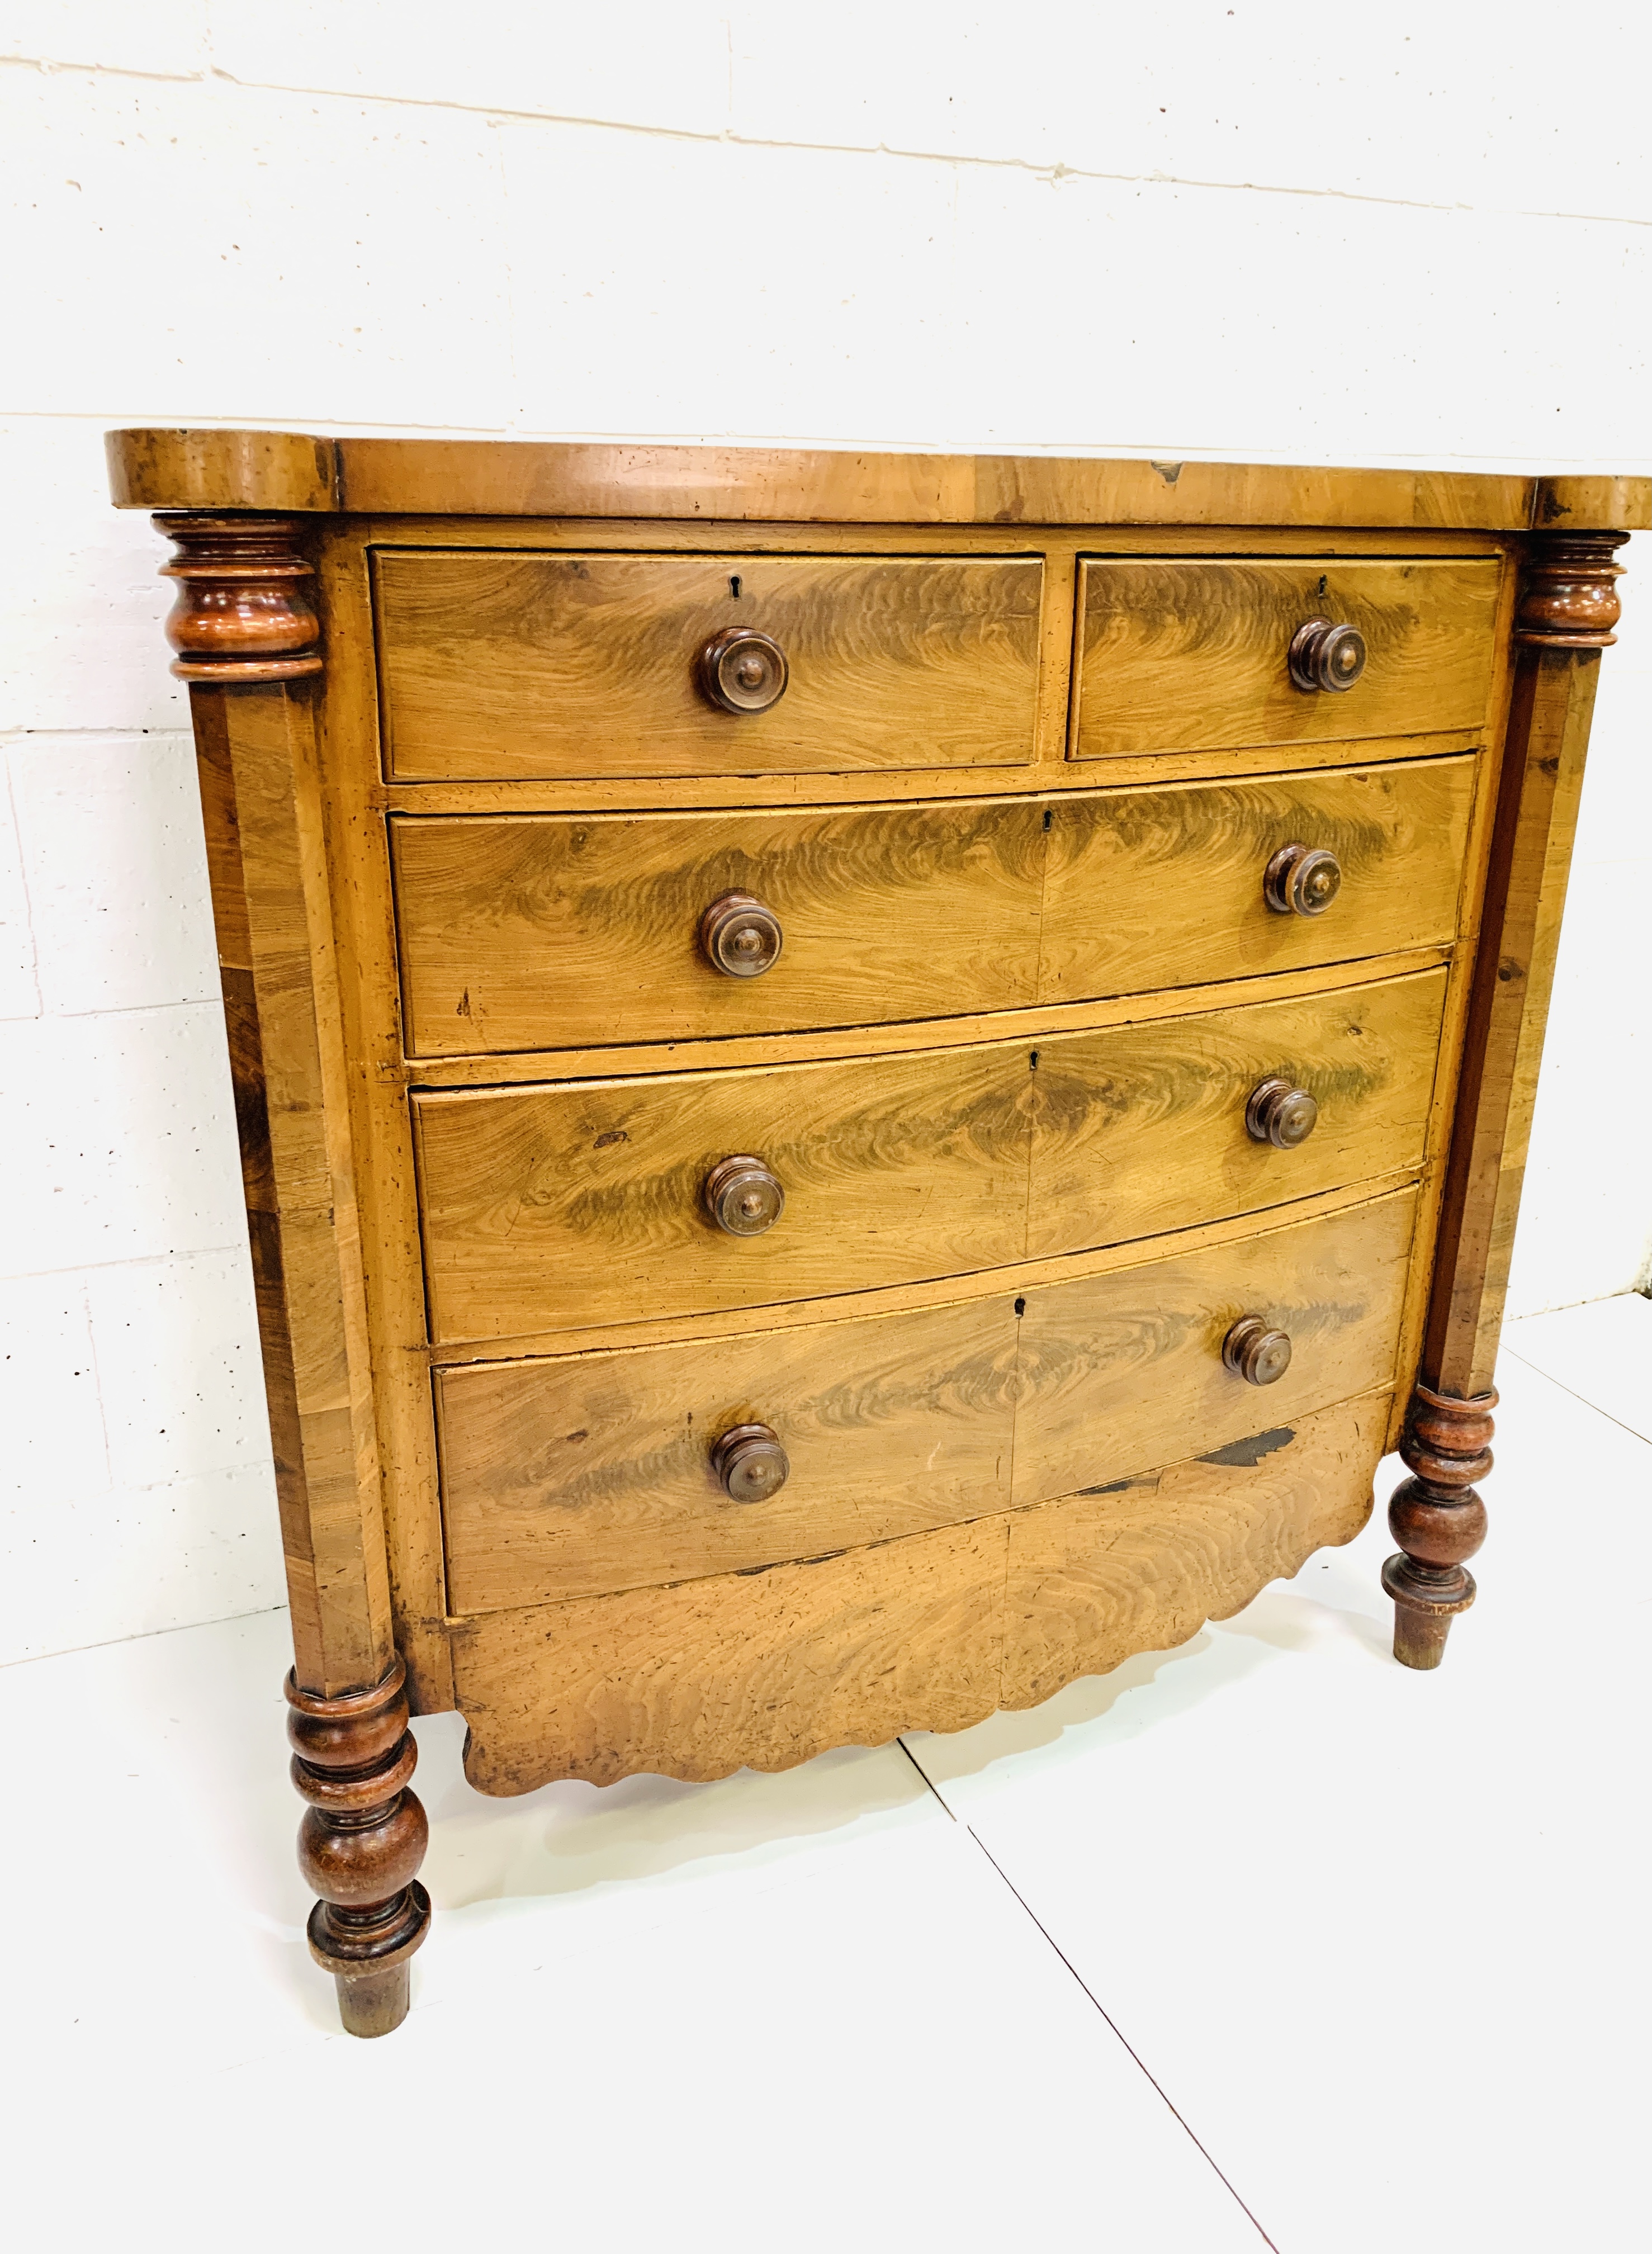 Victorian mahogany veneer Scotch chest of drawers - Image 2 of 8